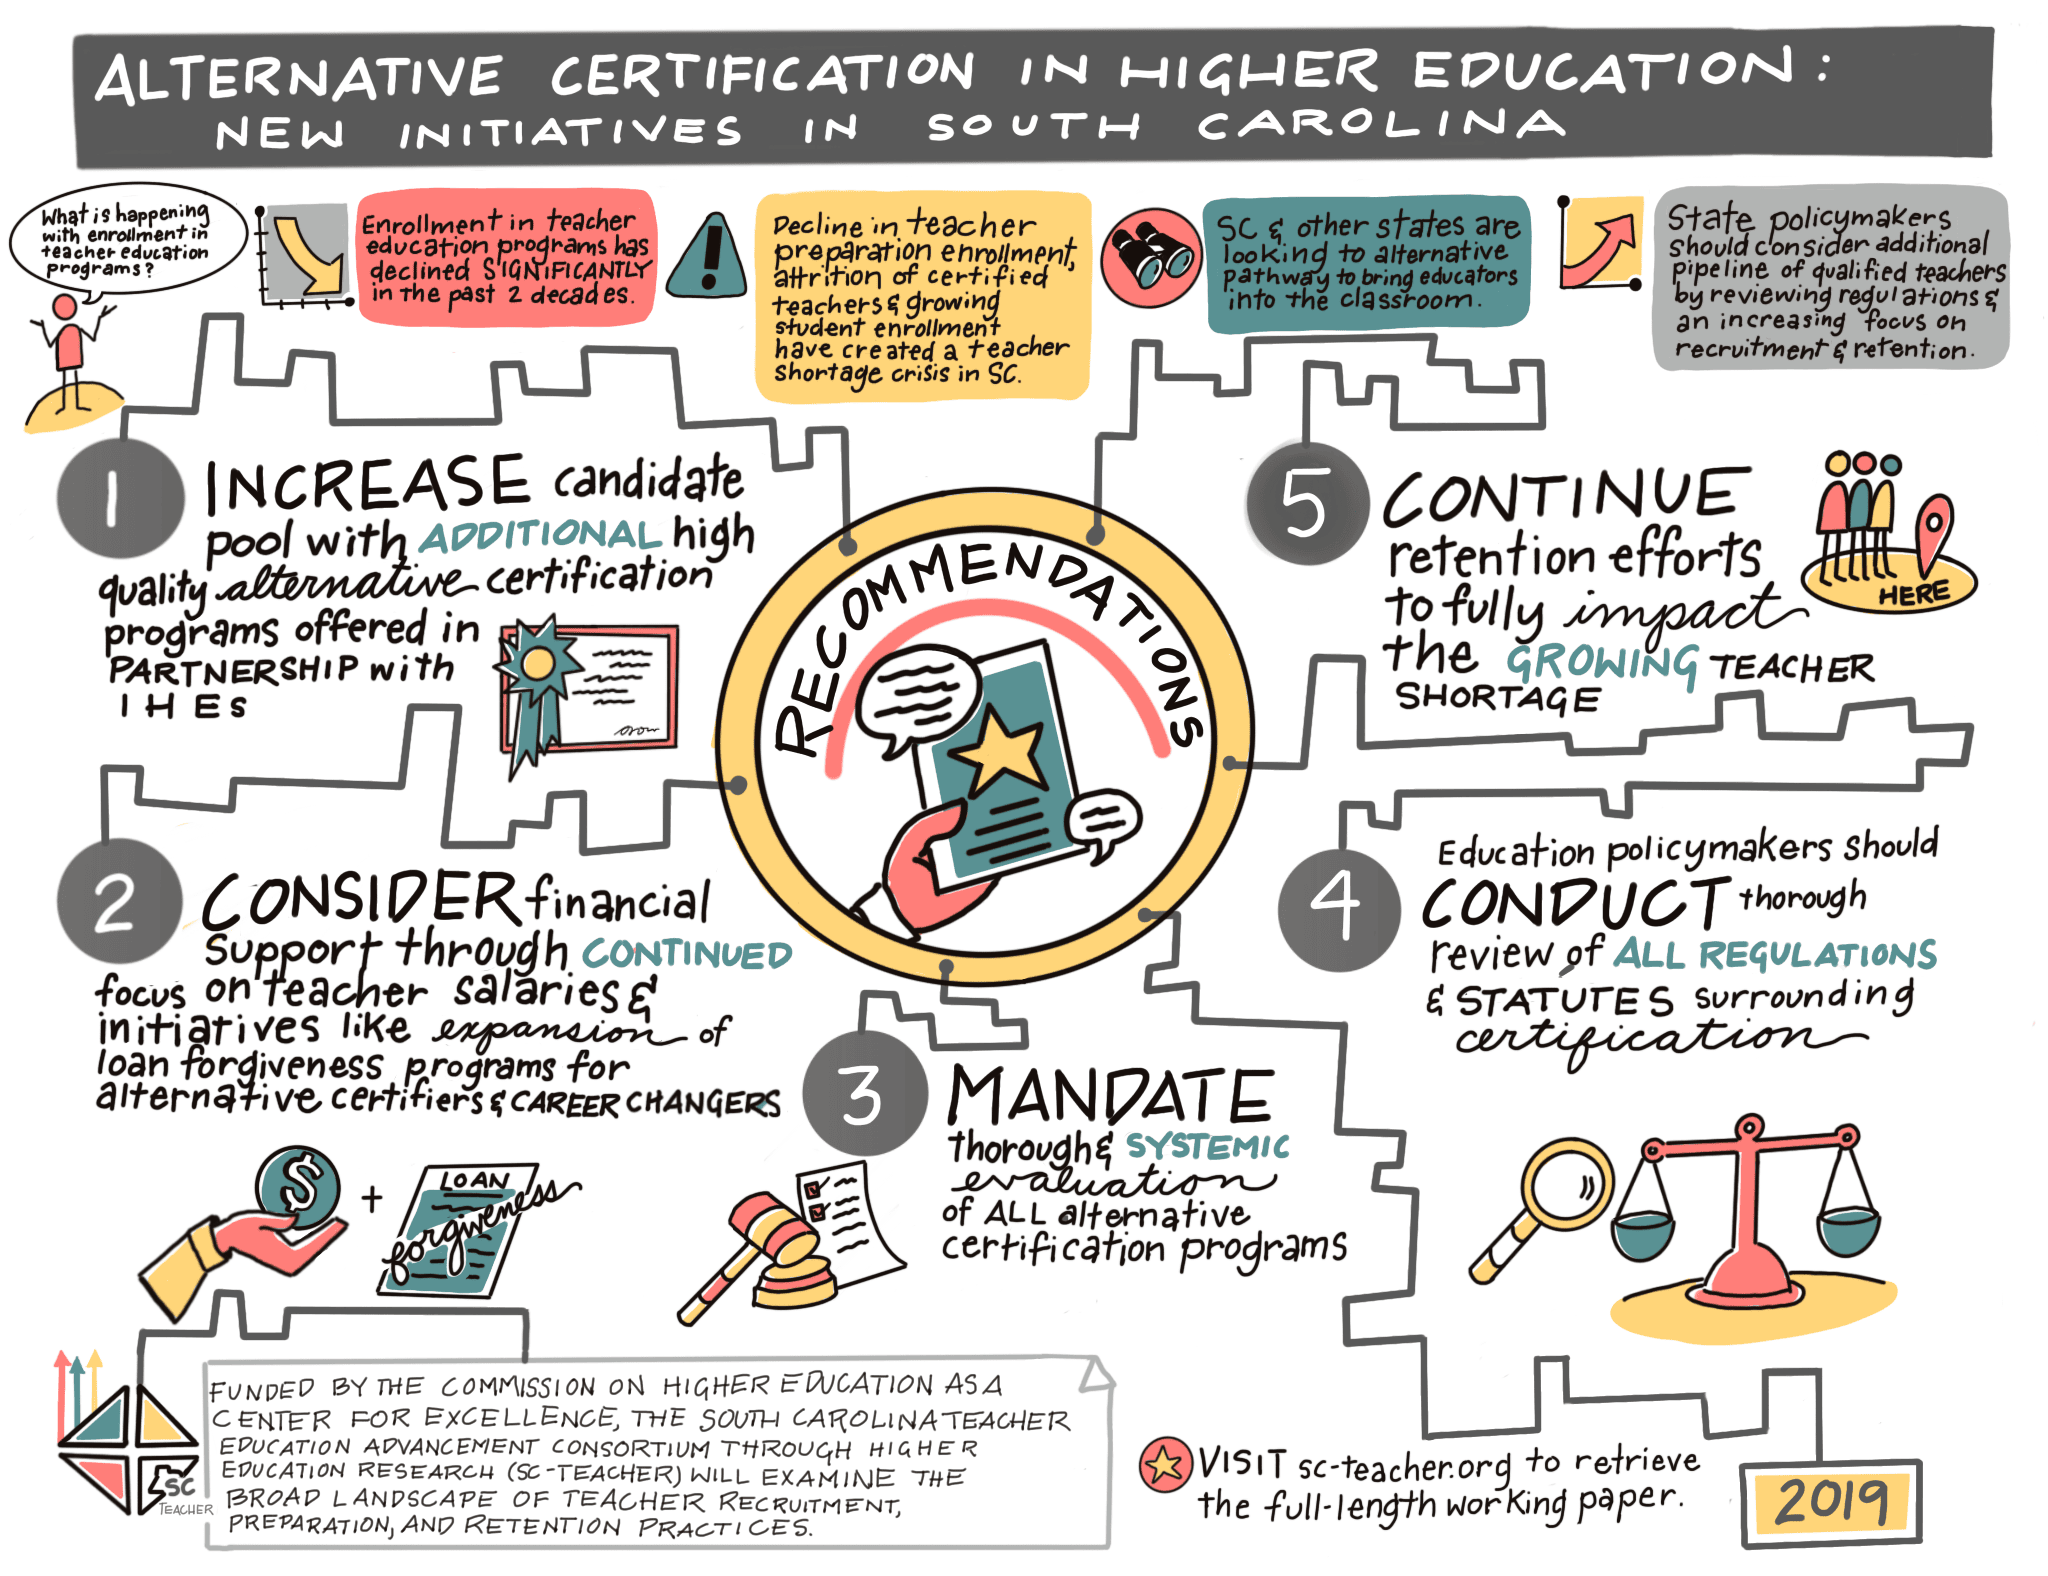 Alternative Certification in Higher Education: New Initiatives in South